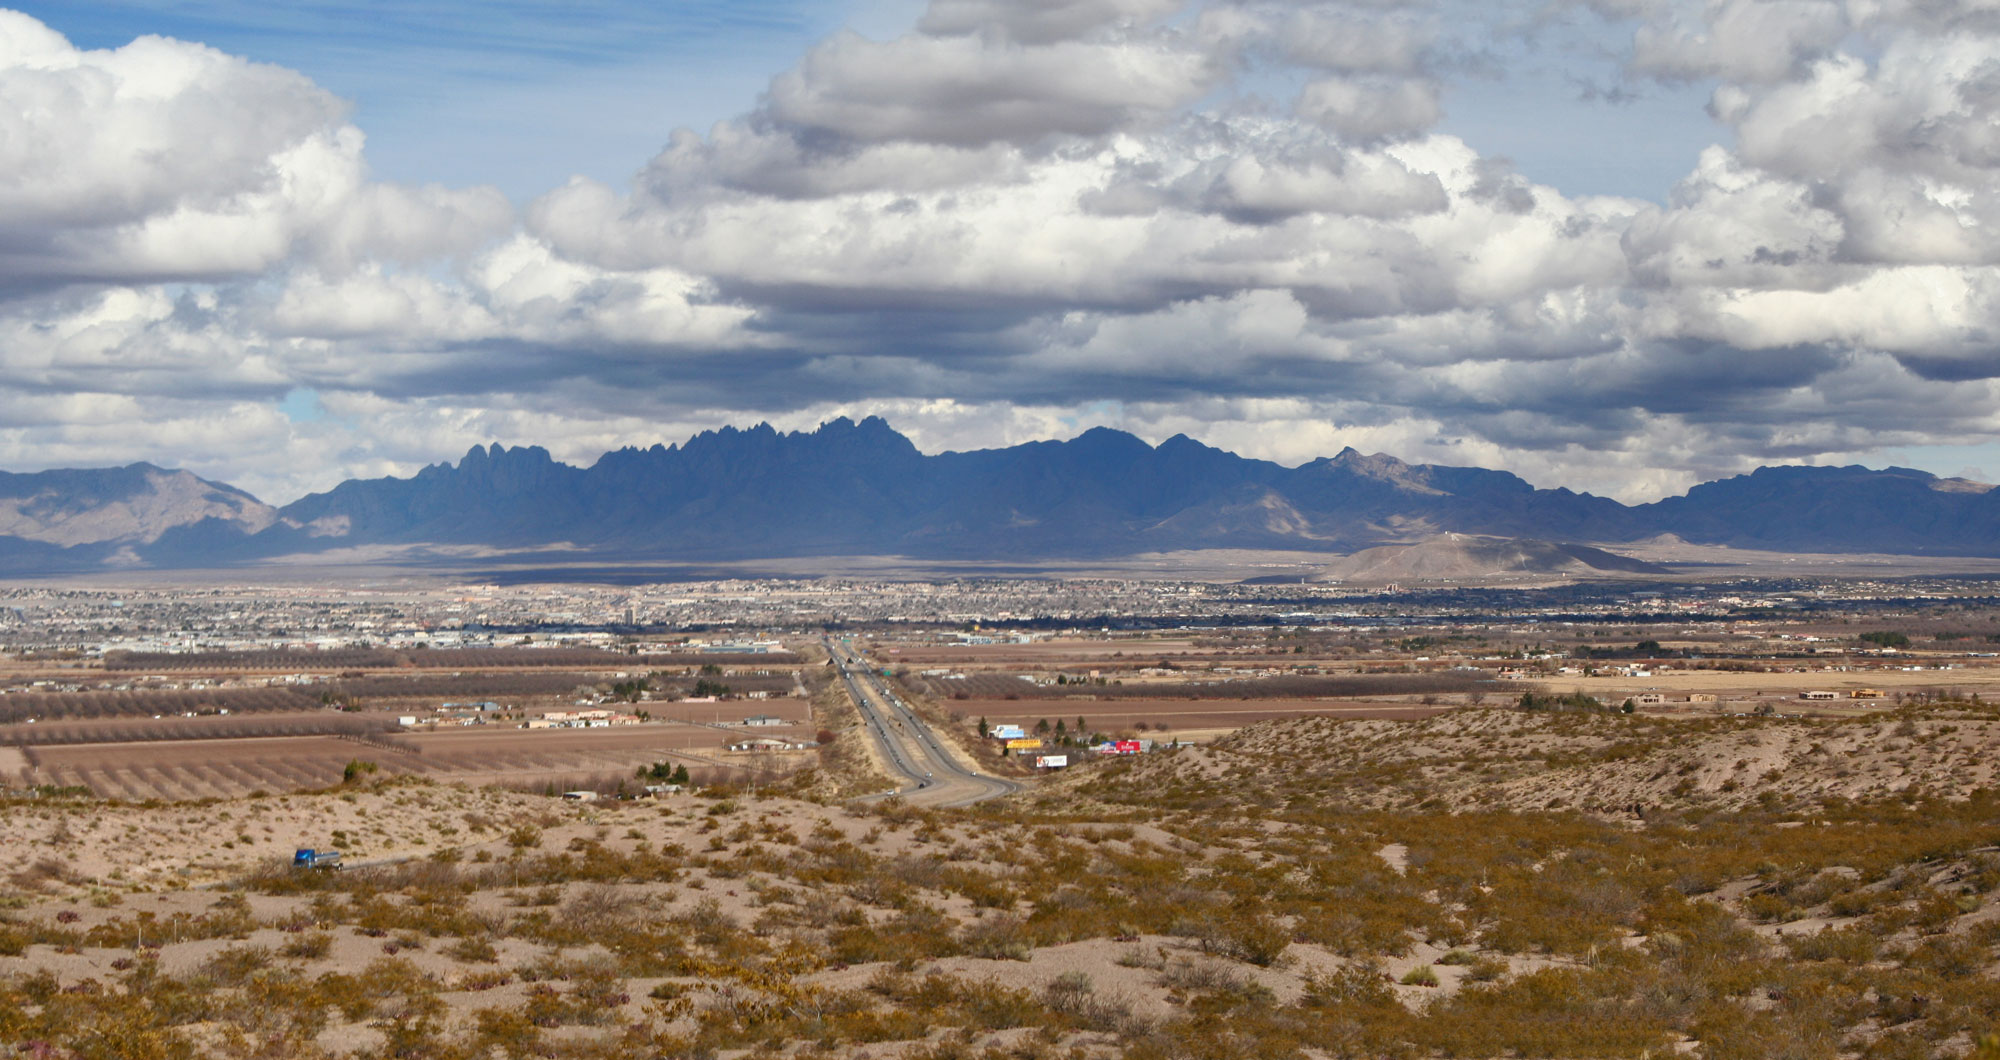 Photograph of Las Cruces, New Mexico. On the horizon, a mountain range rises with the city on a flat plain in front of it. Nearest the camera is a dry landscape dotted with plants separated by patches of bare ground.